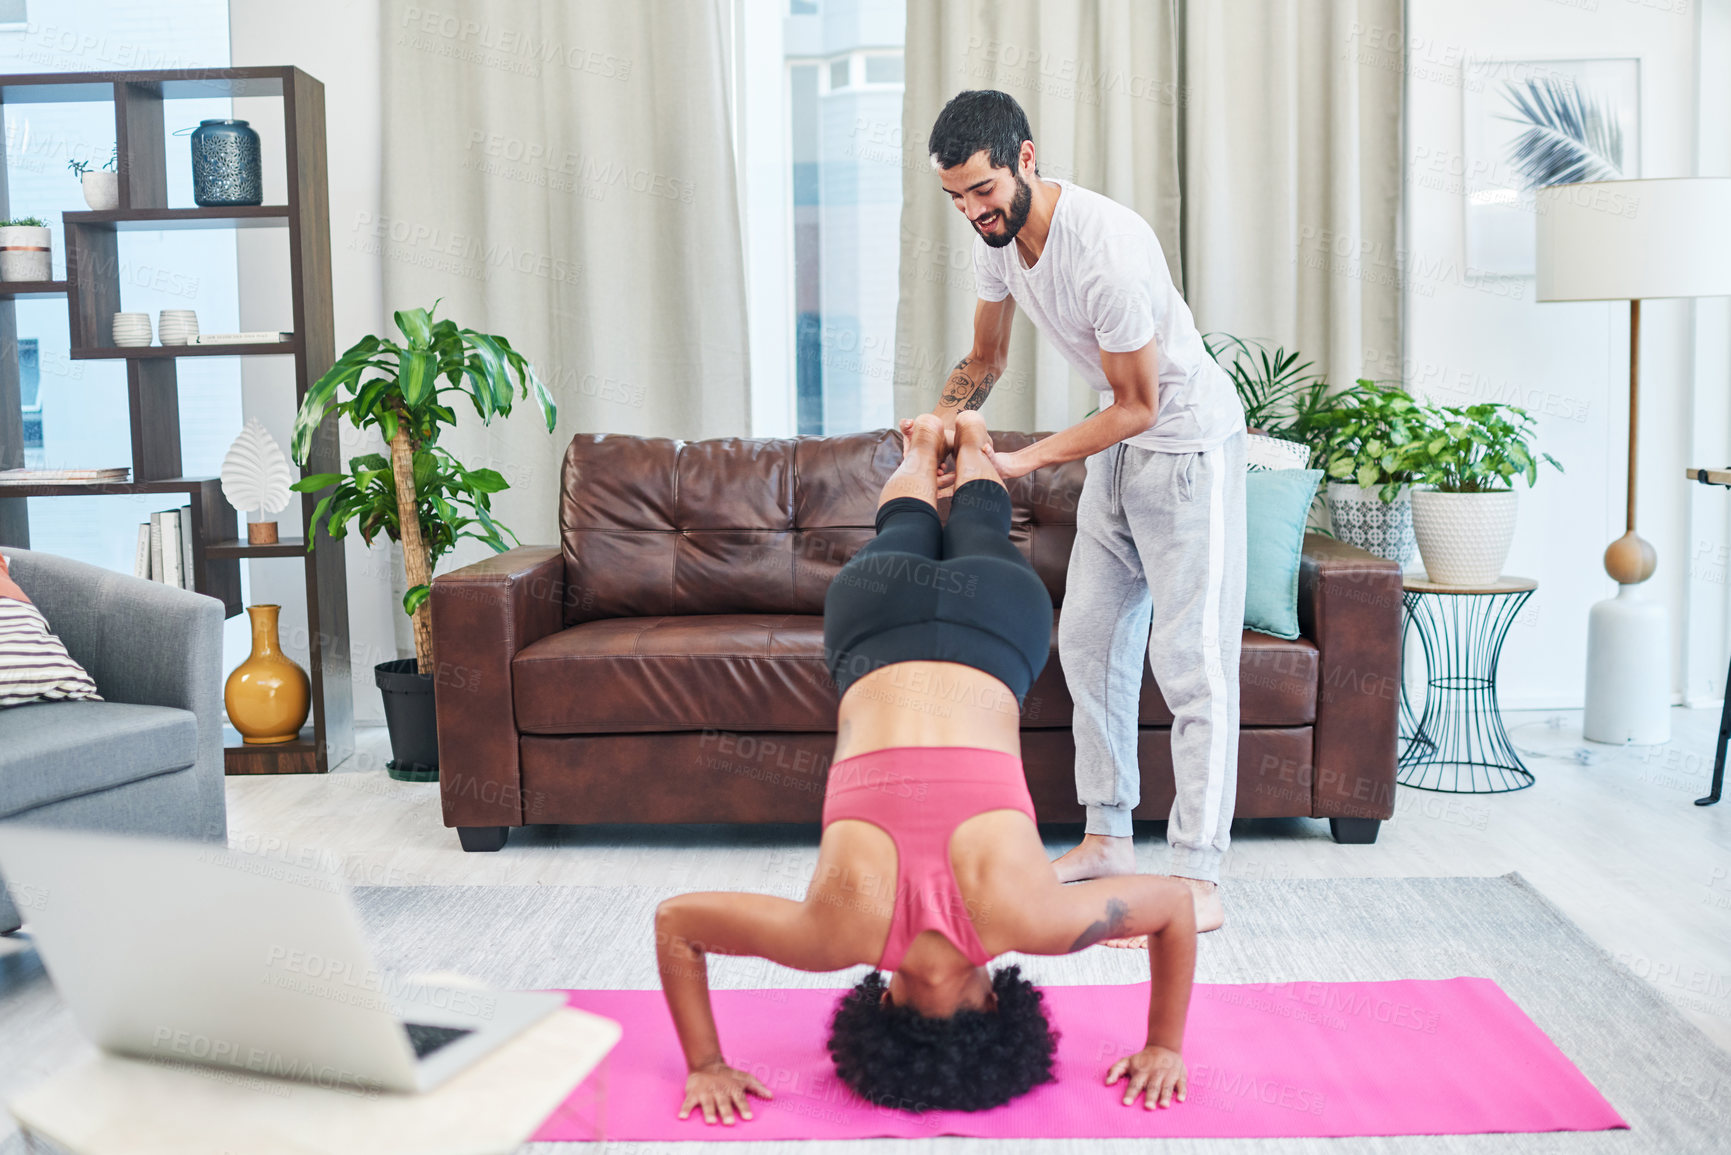 Buy stock photo Shot of a young couple practising yoga in their living room